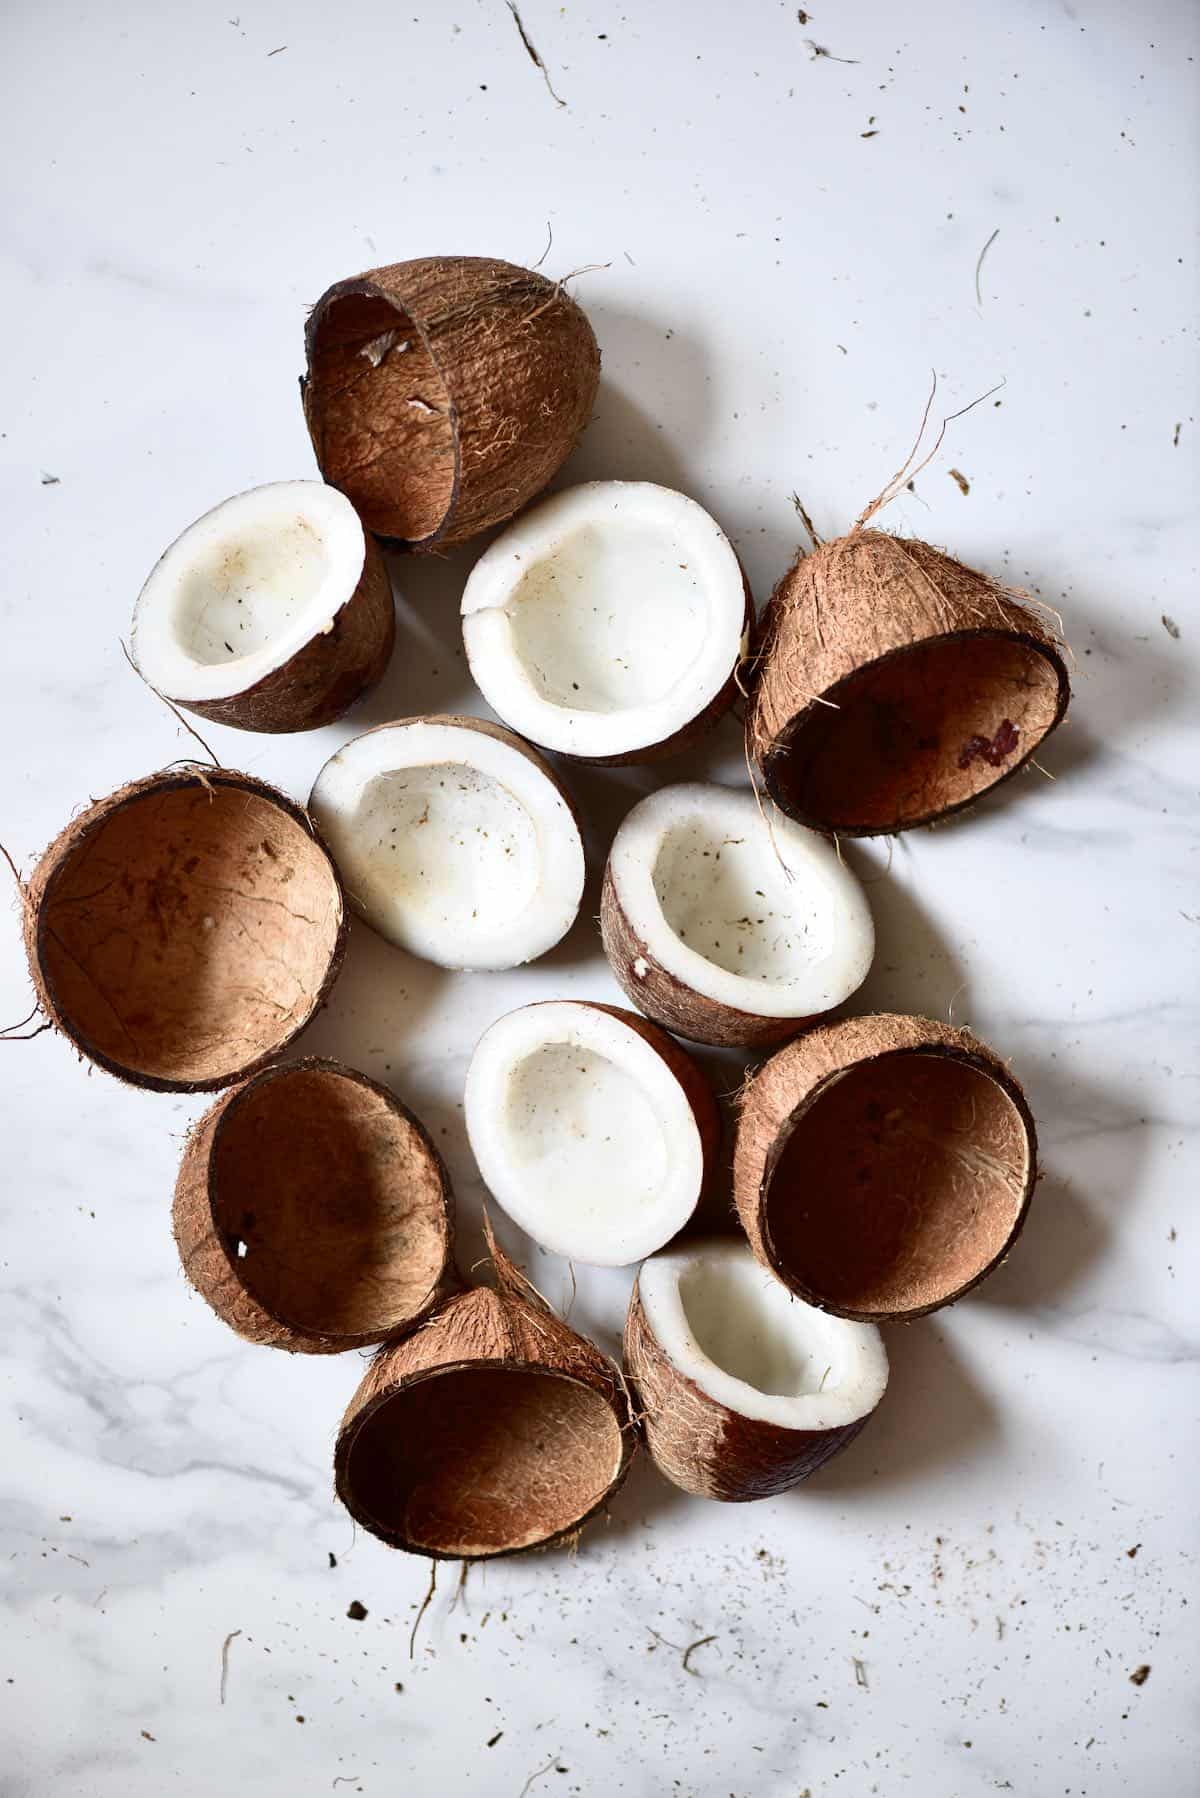 How To Store Coconut After Opening